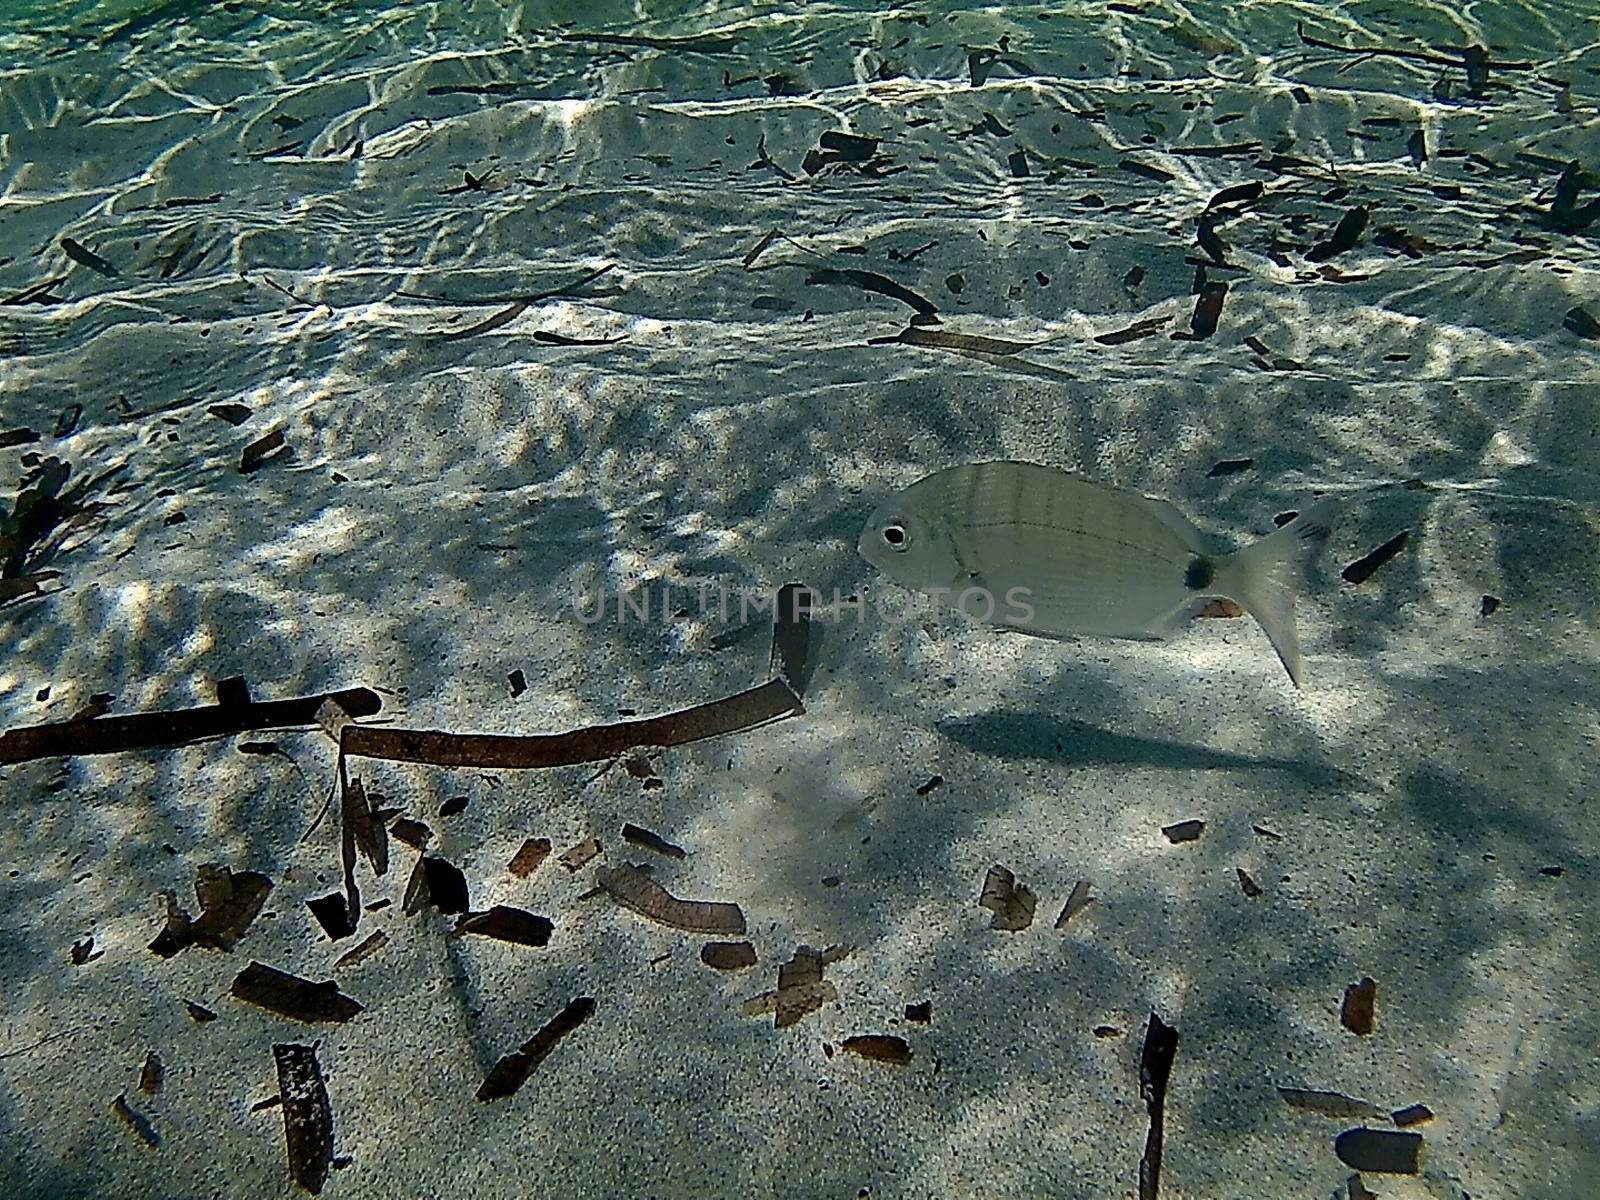 Lonely fish among the white sands of the Mediterranean Sea.Aquatic photography, light, big silver fish. poseidonia seaweed